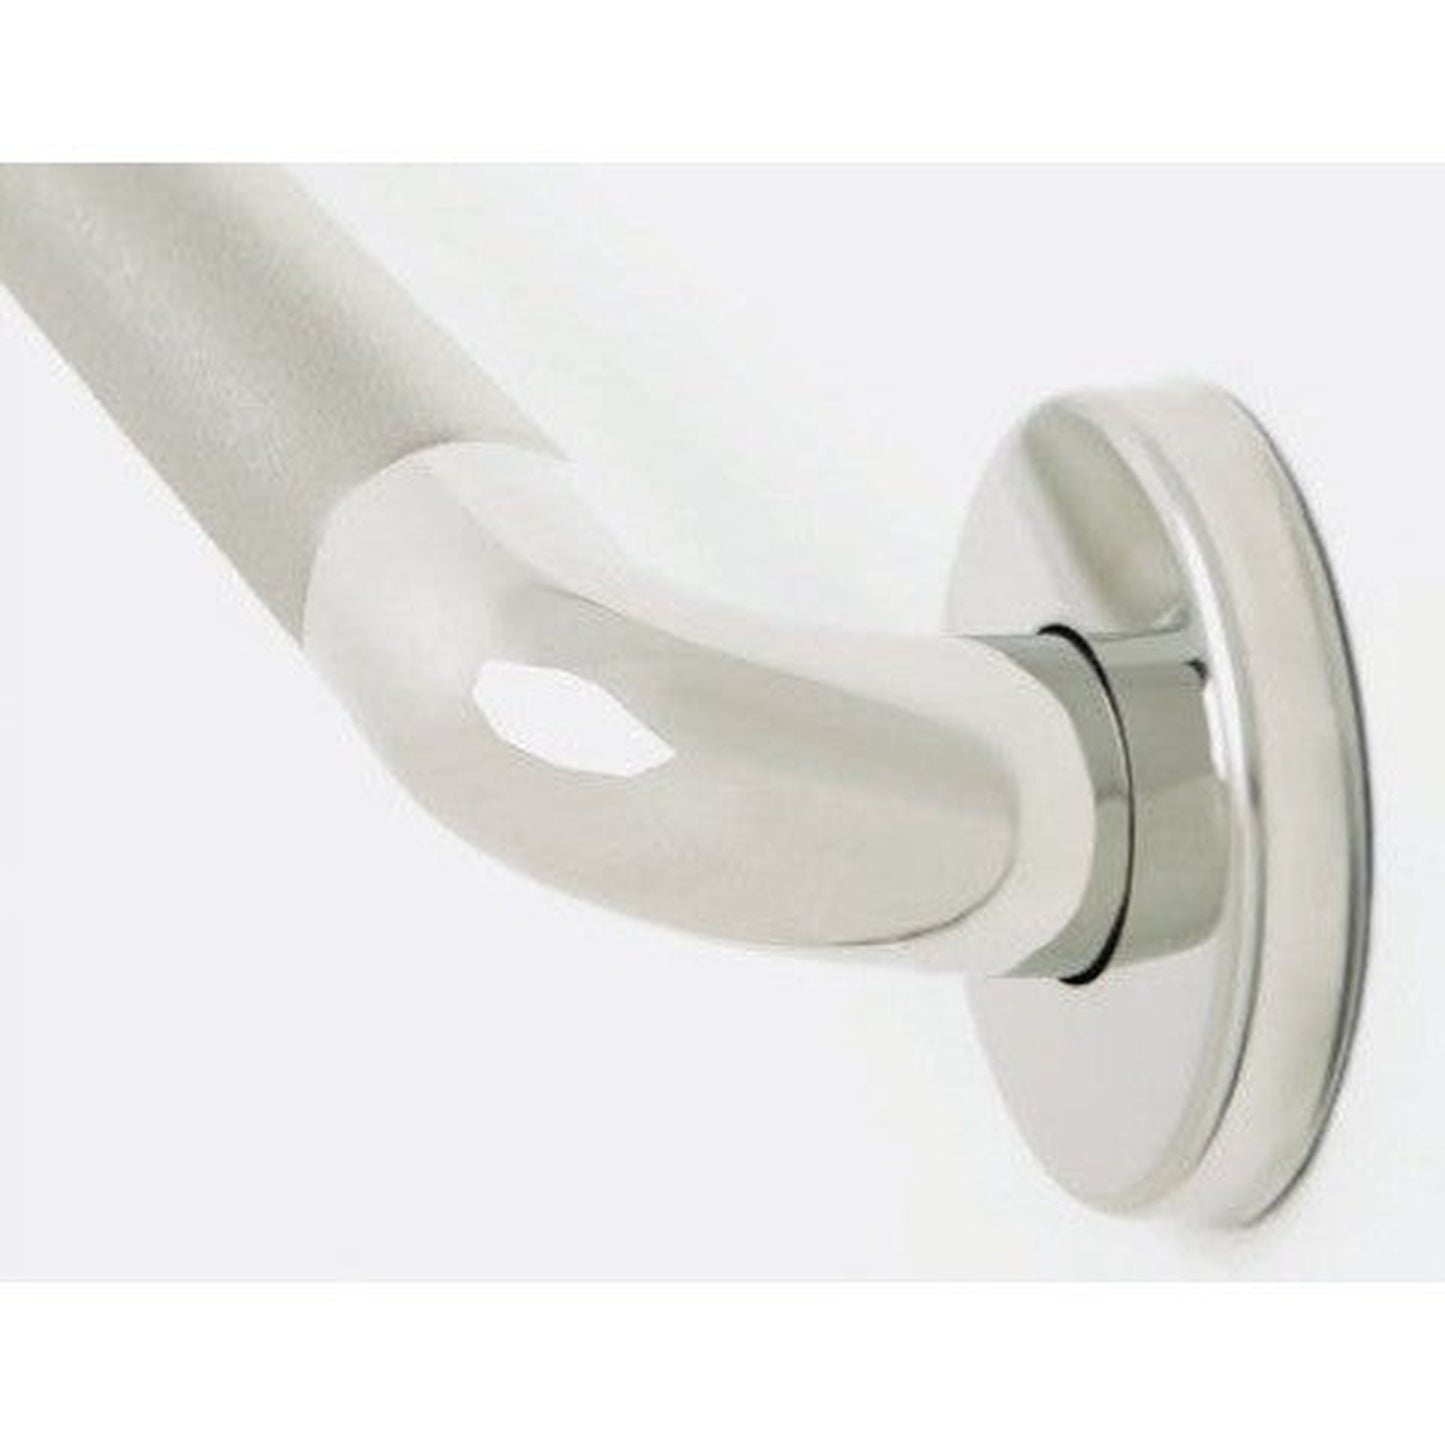 Seachrome Signature Series Value Line IGZS 36" Peened Stainless Steel With Polished Ends 1.25" Tube Diameter Concealed Flange Grab Bar